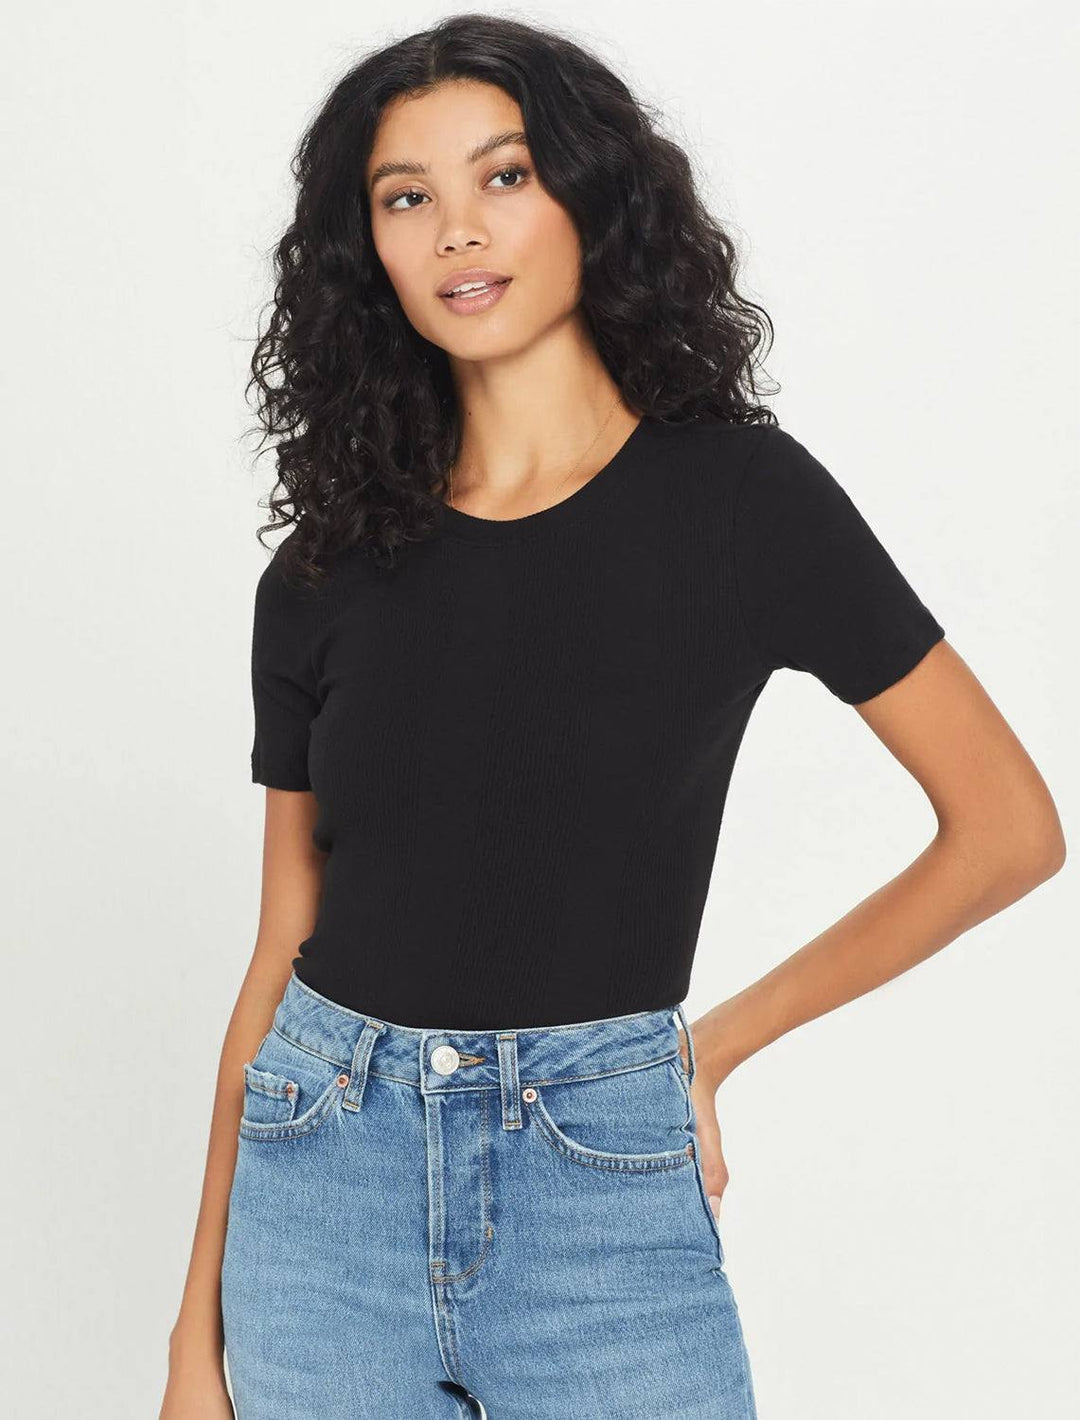 model wearing cotton rib tee in black with mid-wash jeans